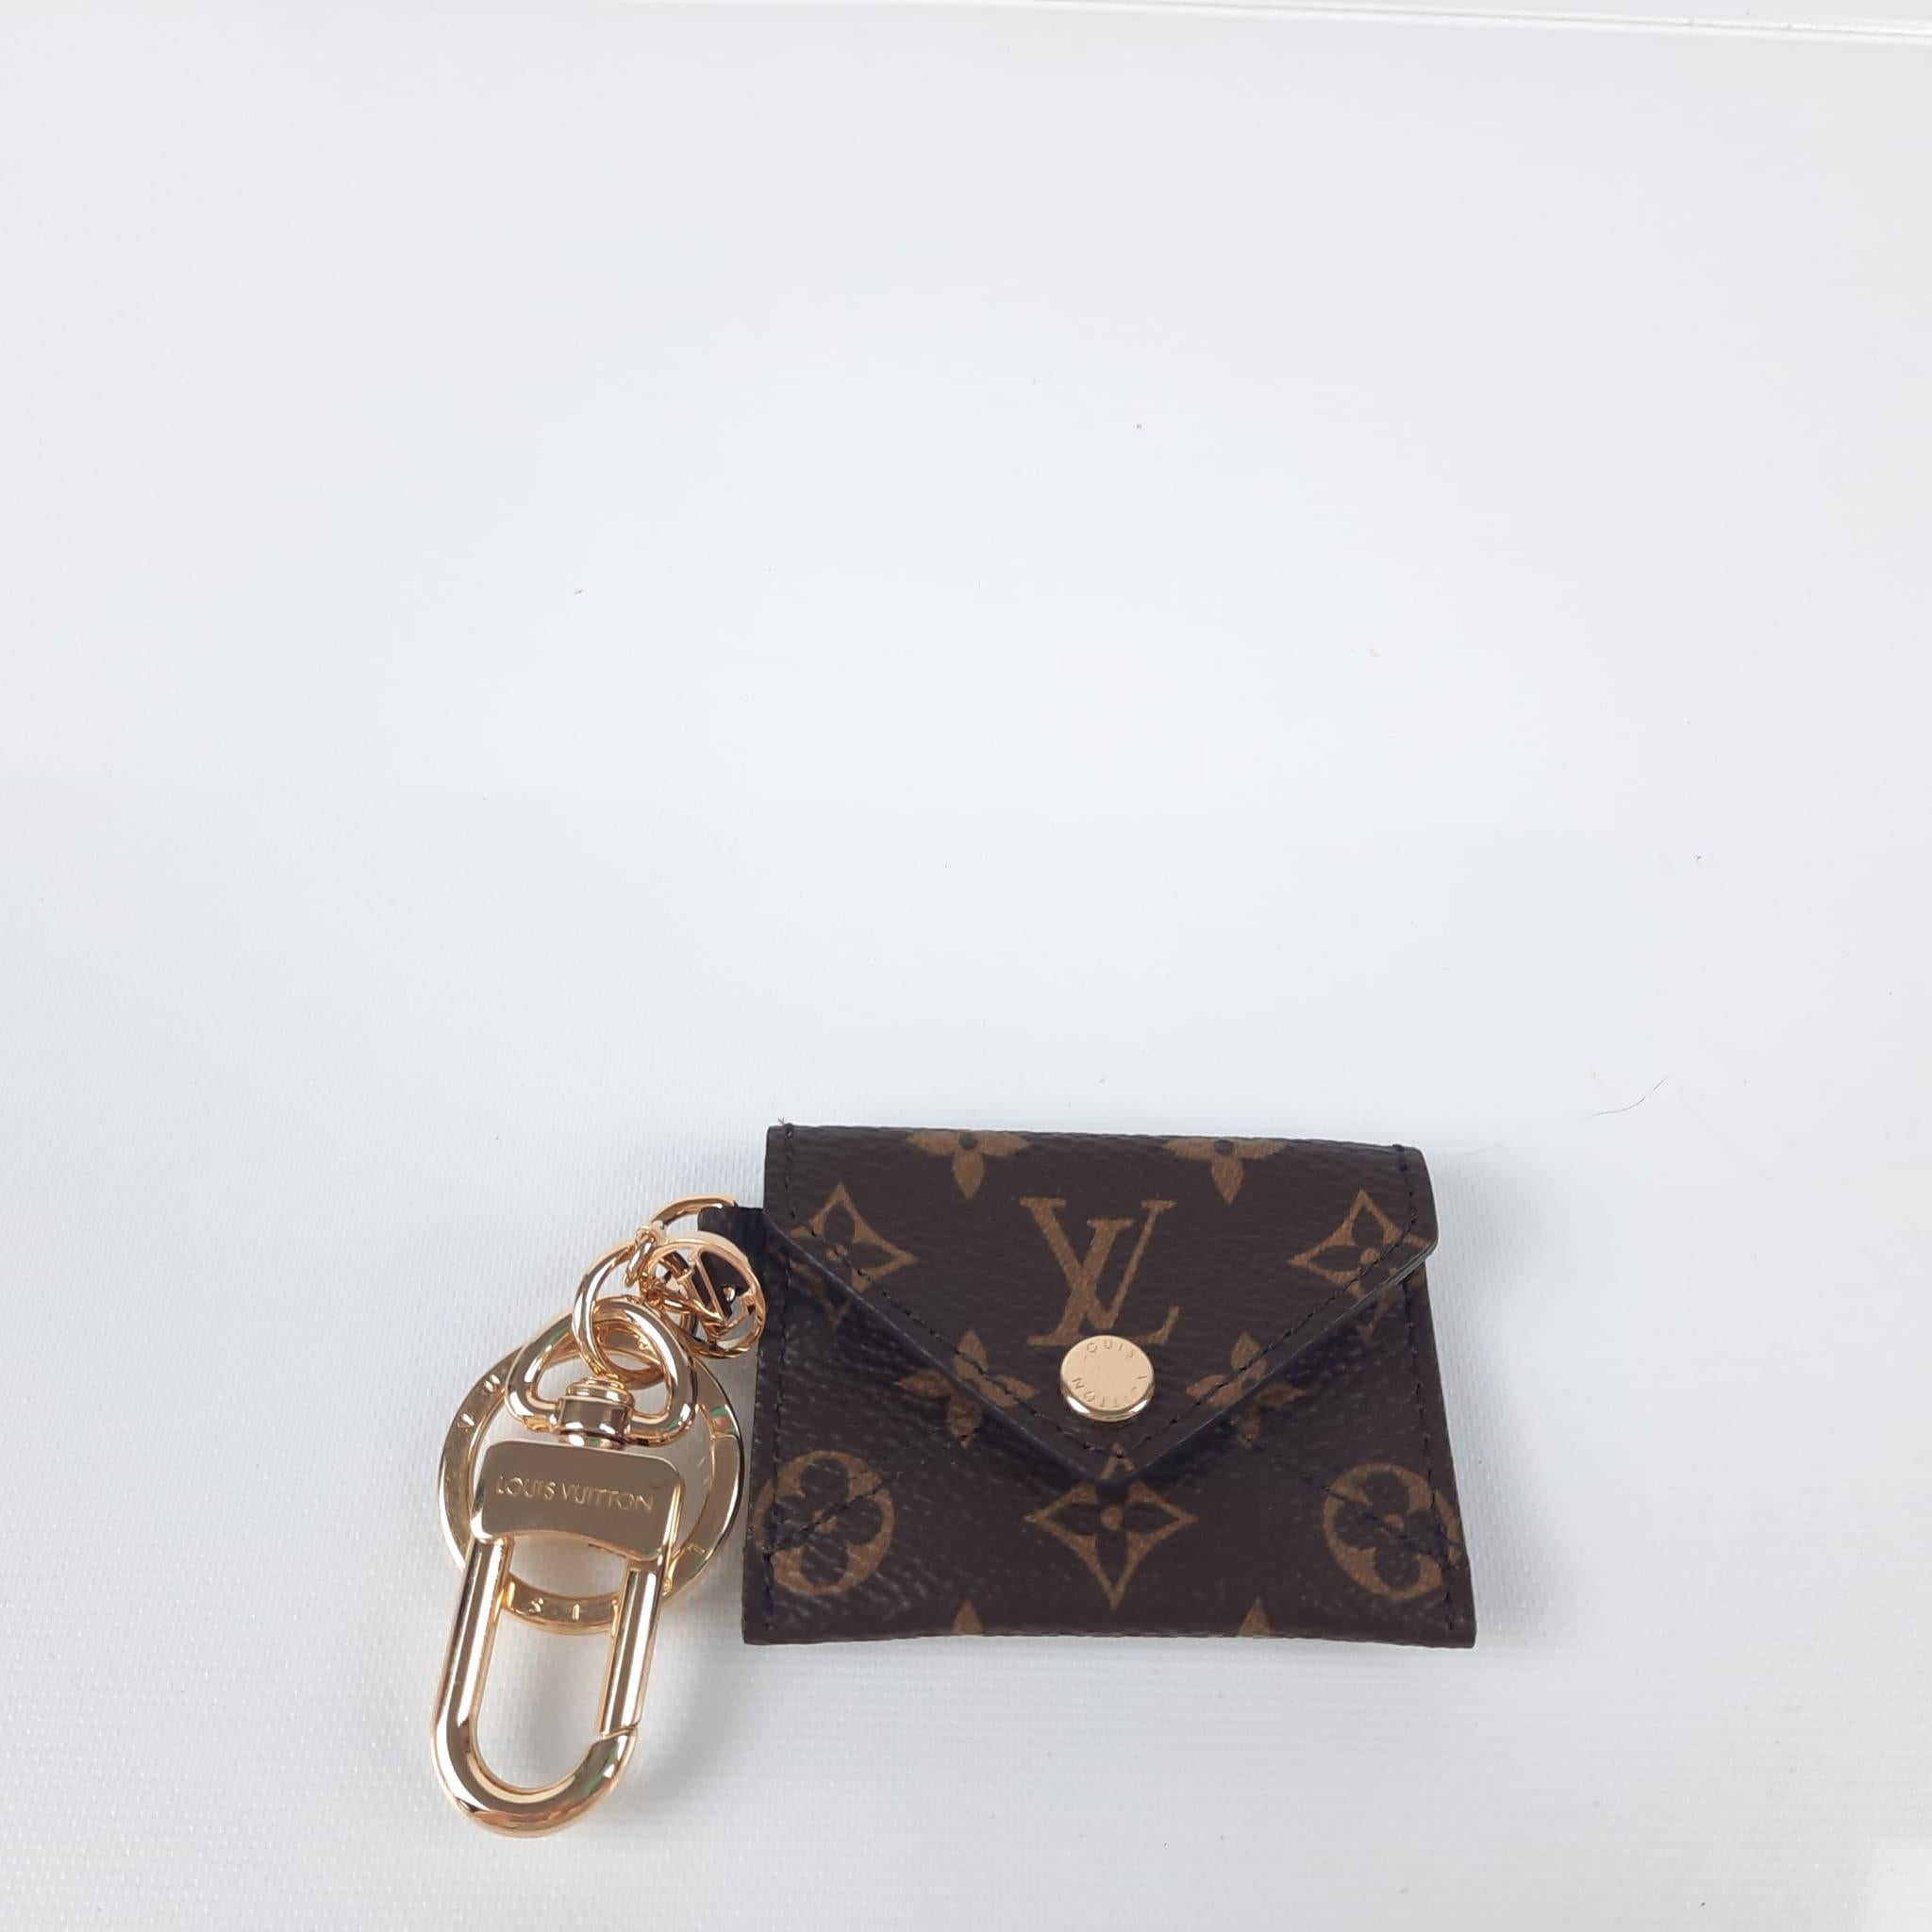 This Kirigami bag charm and pouch key ring is characterized by a functional and elegant design. Dressed in iconic Monogram canvas, this model features a pocket closed by a press stud. Noteworthy details include a suede calfskin lining and several